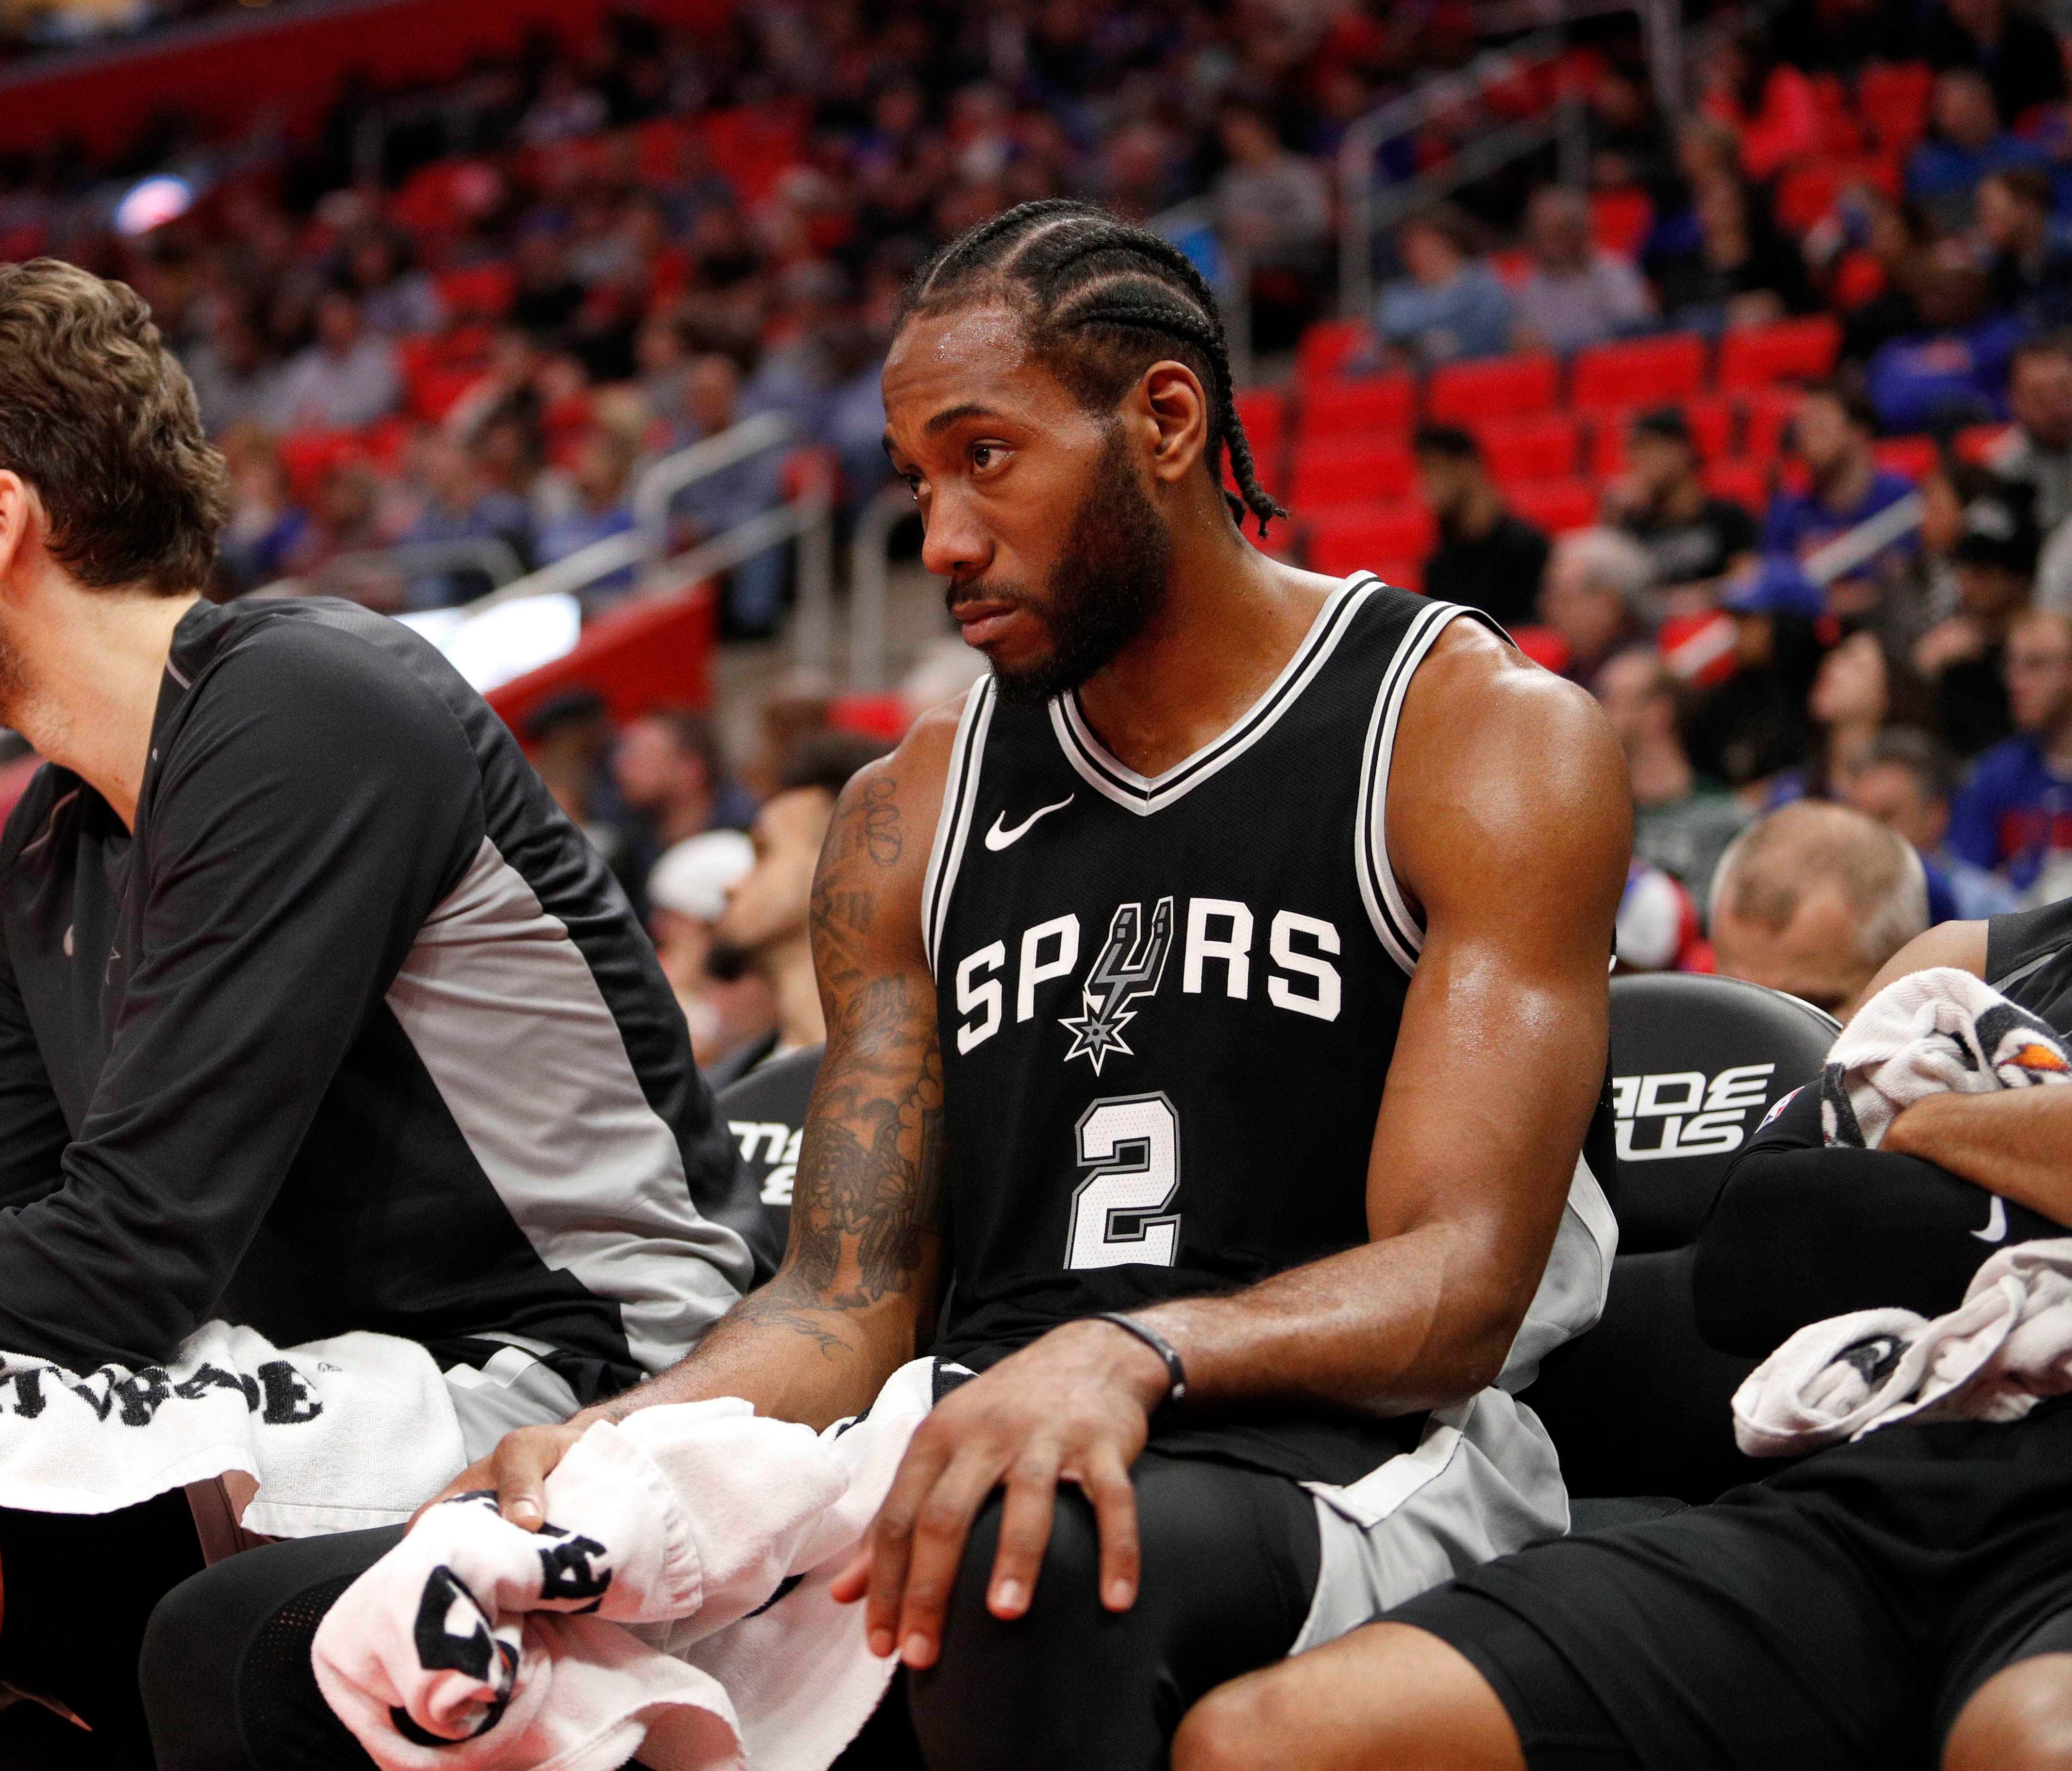 San Antonio Spurs forward Kawhi Leonard (2) sits on the bench during the fourth quarter against the Detroit Pistons at Little Caesars Arena.